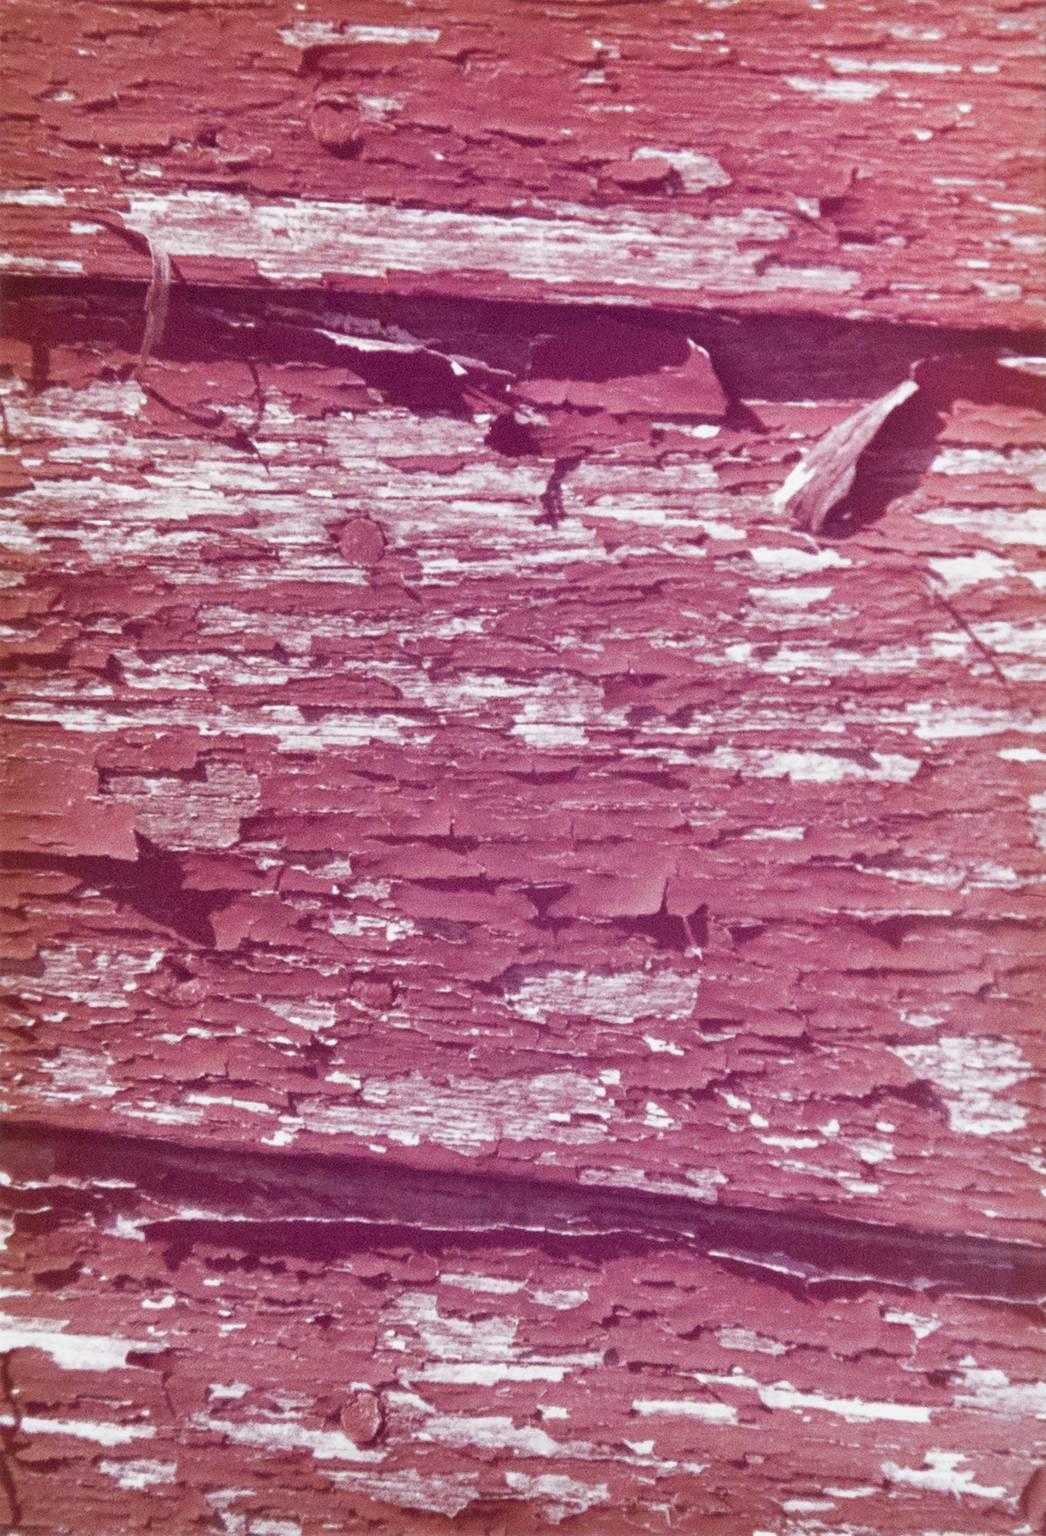 "Flaking Red" is an original fine art photography print by James Auer. The artist signed and titled the piece on the mat. It depicts a close-up image of flaking red paint, abstracting the painted wall into a field of color. 

13 3/4" x 9 1/4"